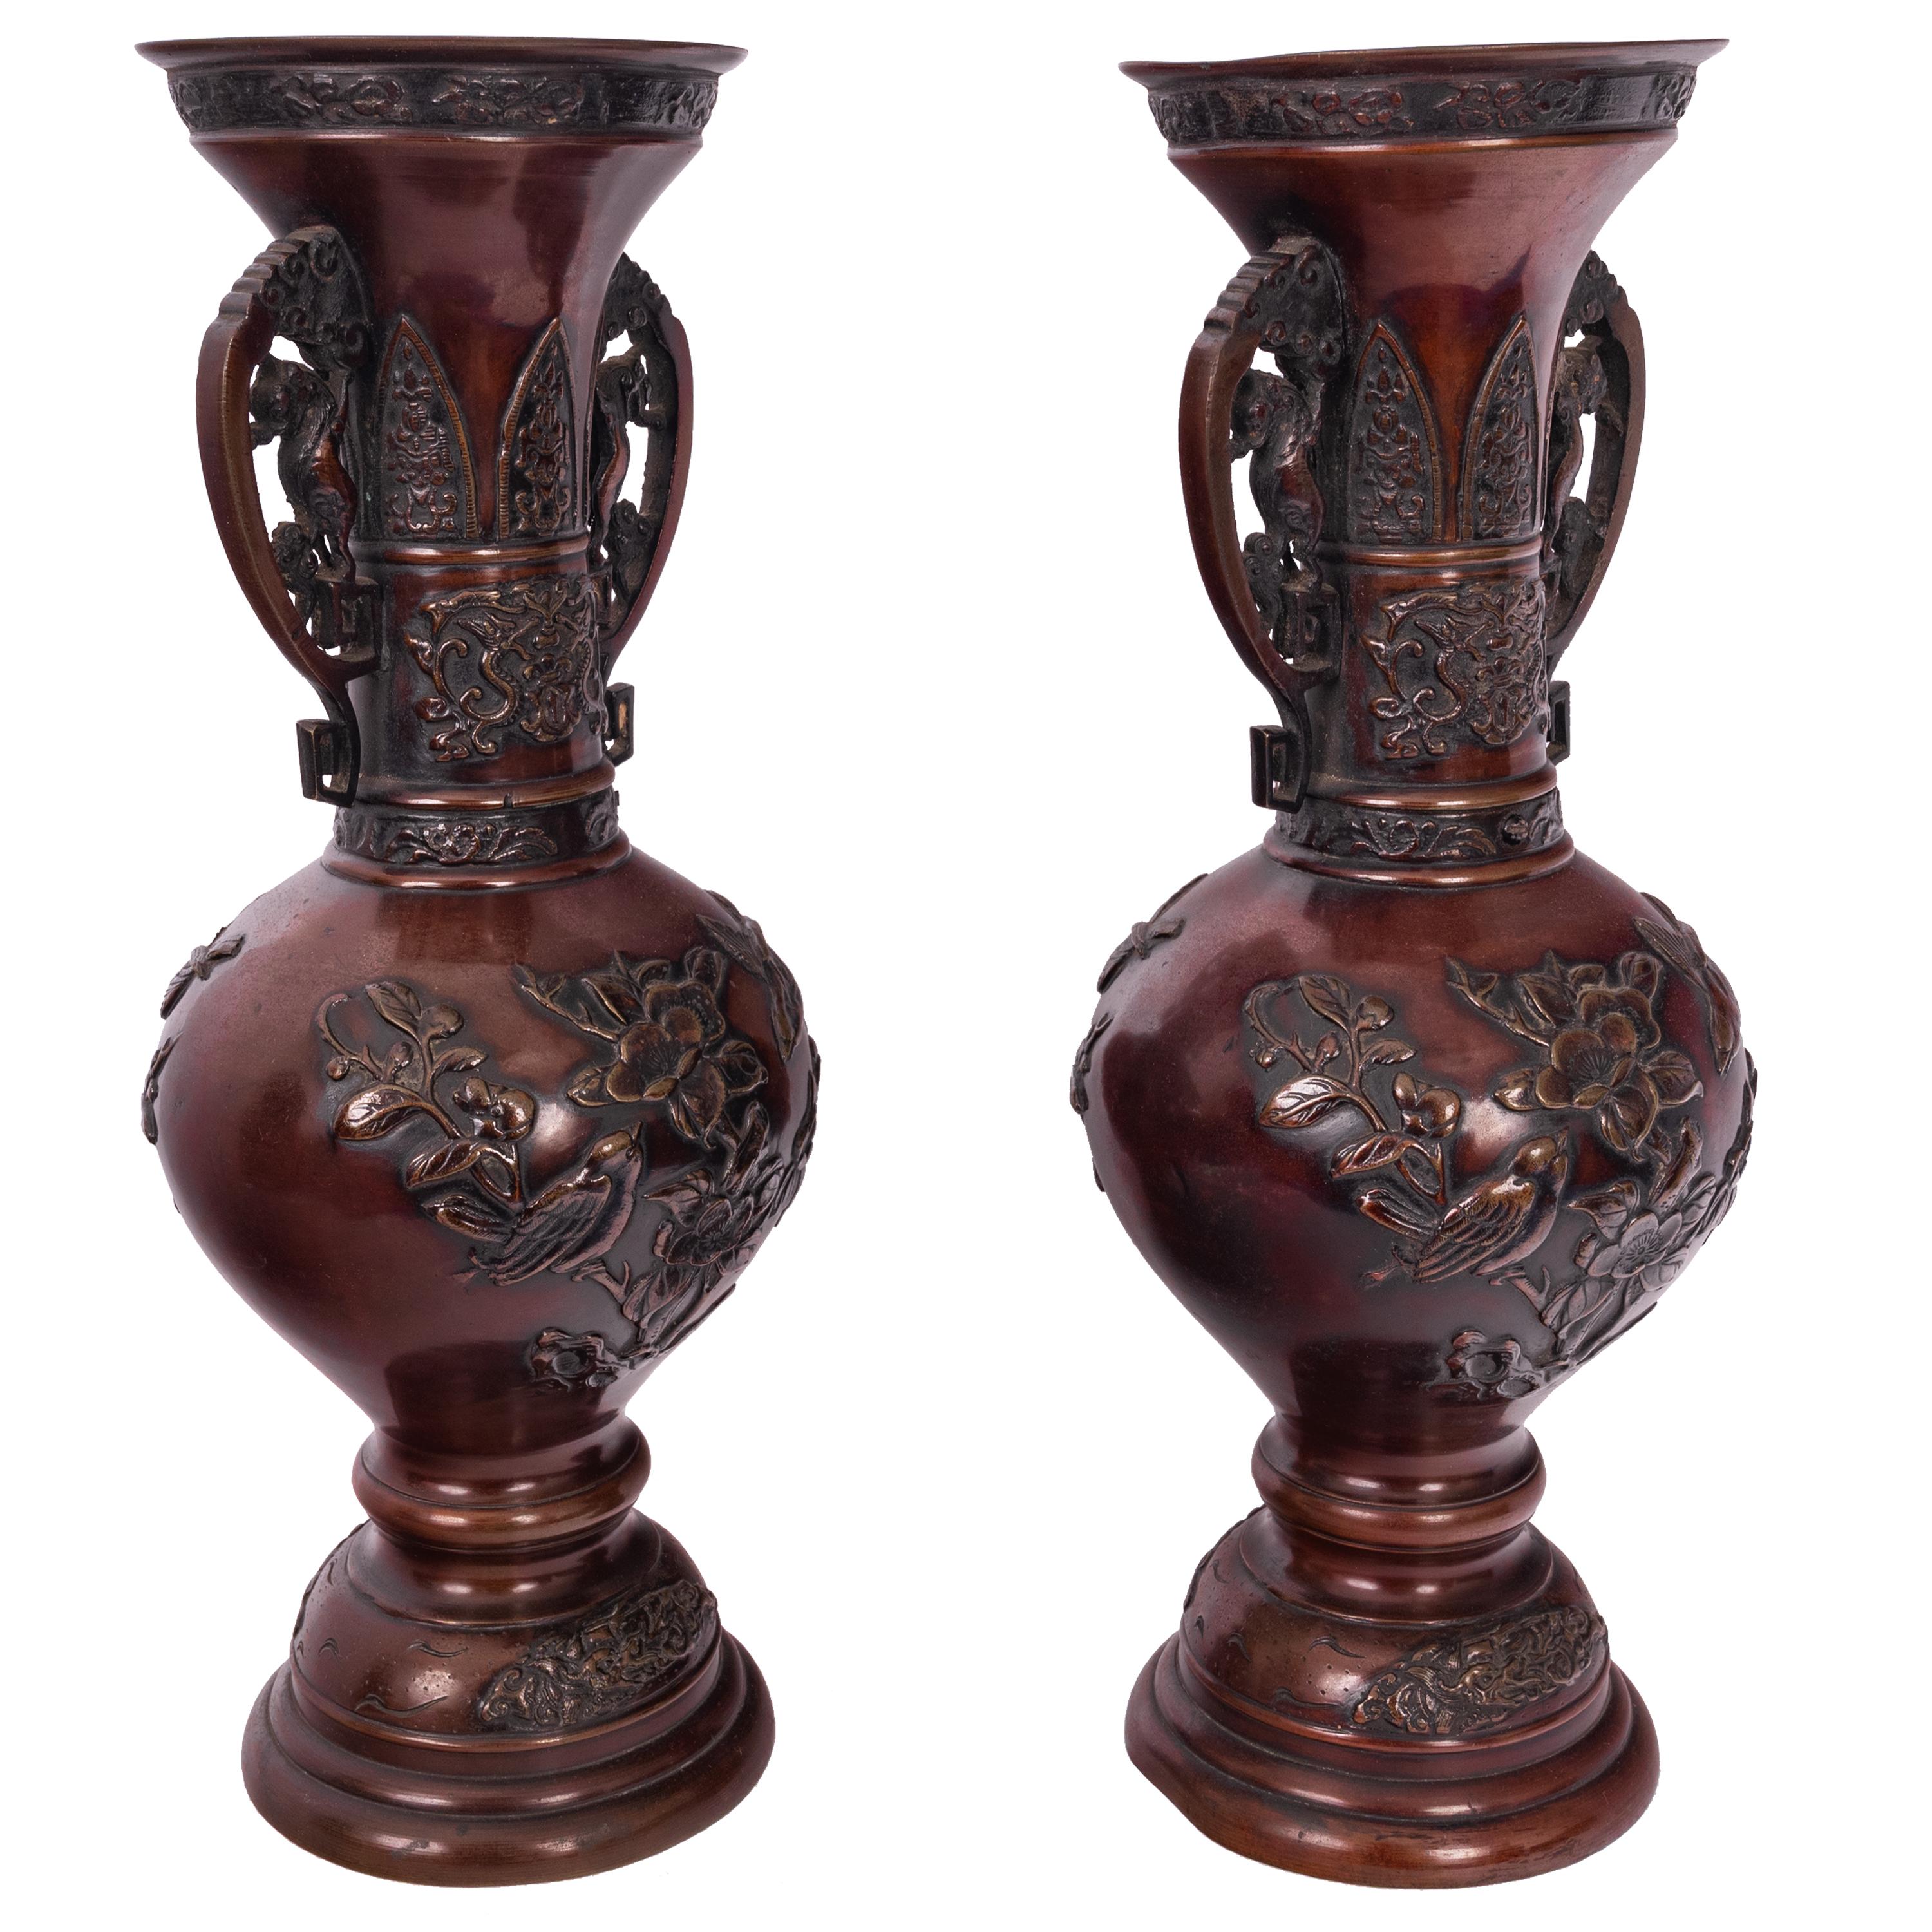 A very fine pair on antique bronze Japanese Meiji period bronze vases, circa 1890.
The vases are very finely cast and modeled in the Aesthetic taste, each vase having twin handles modeled with Japanese lions (Komainu). The flared rims with an